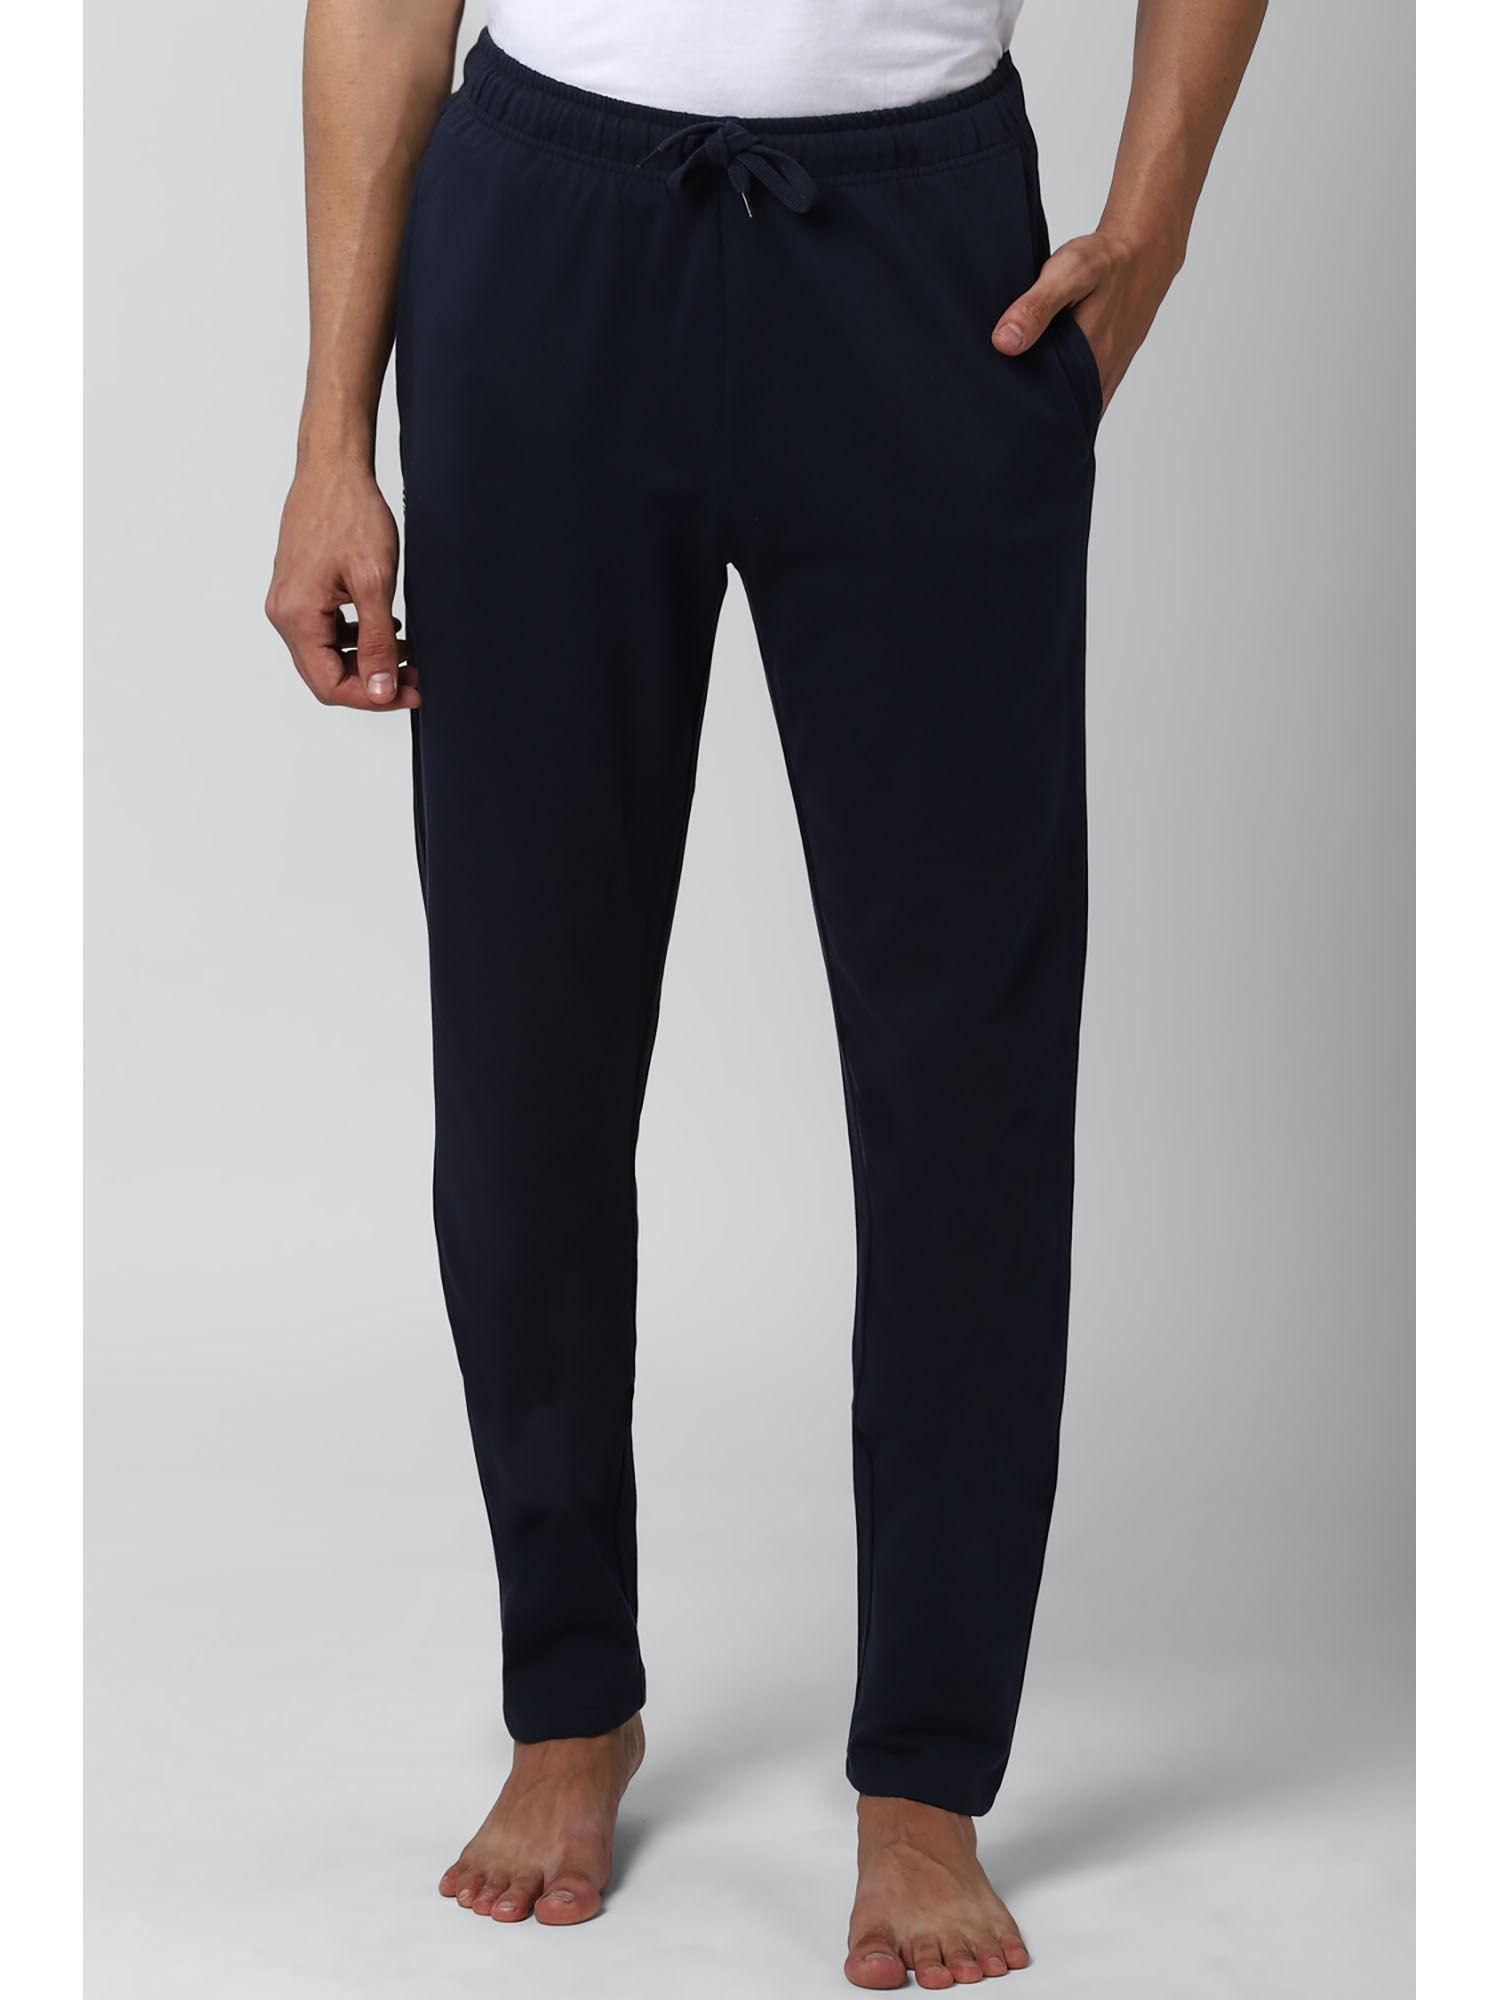 navy track pant